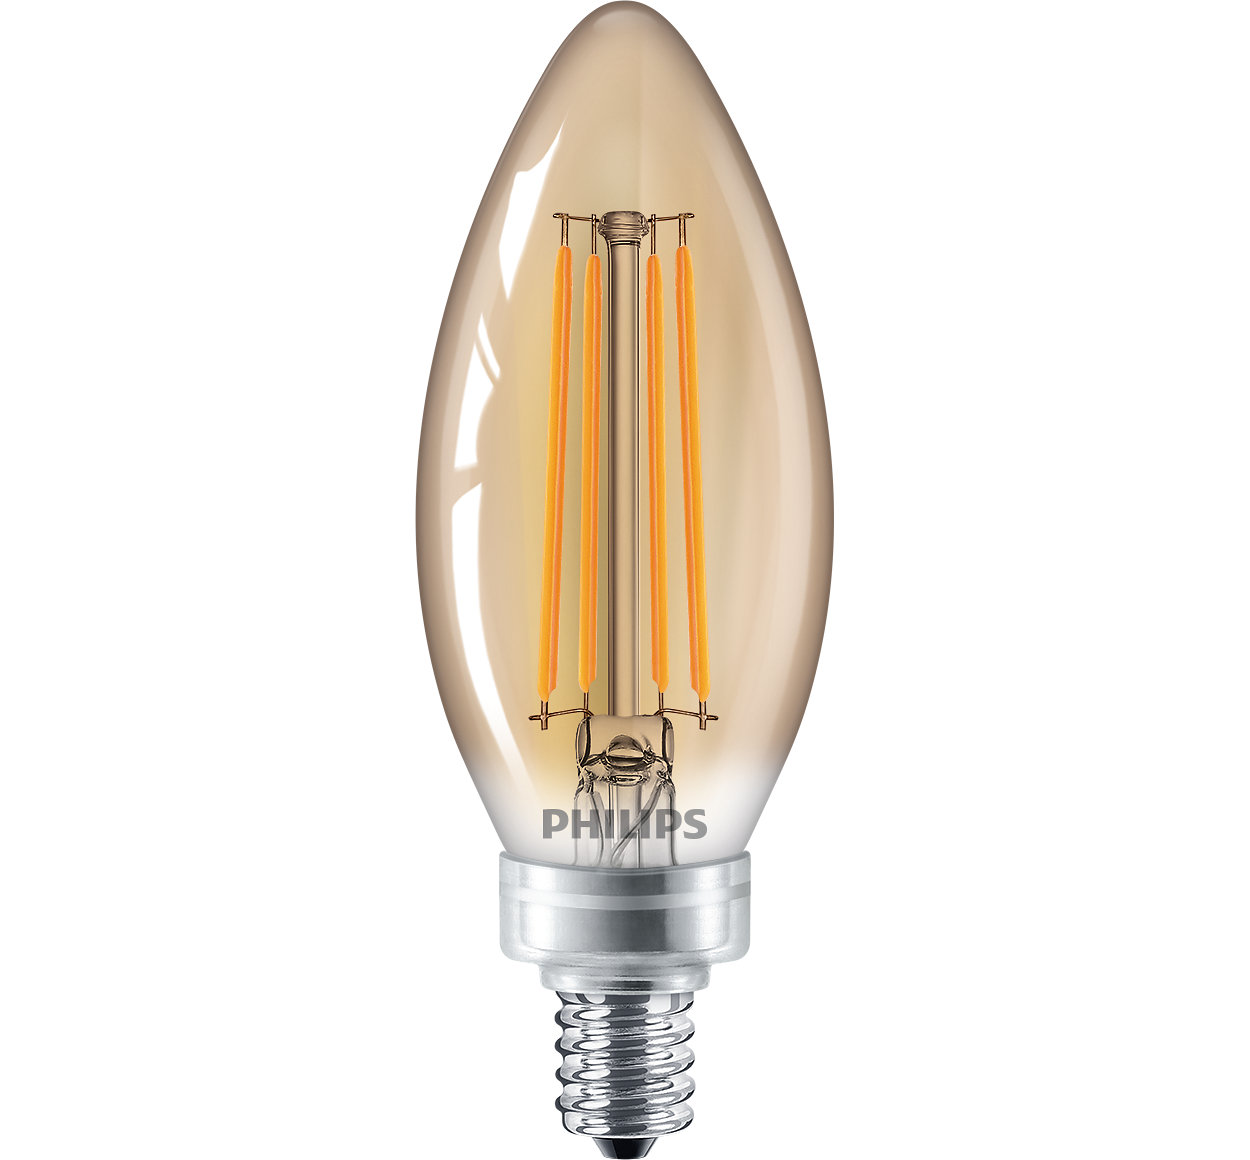 Energy saving elegance that gives a beautiful sparkle of light